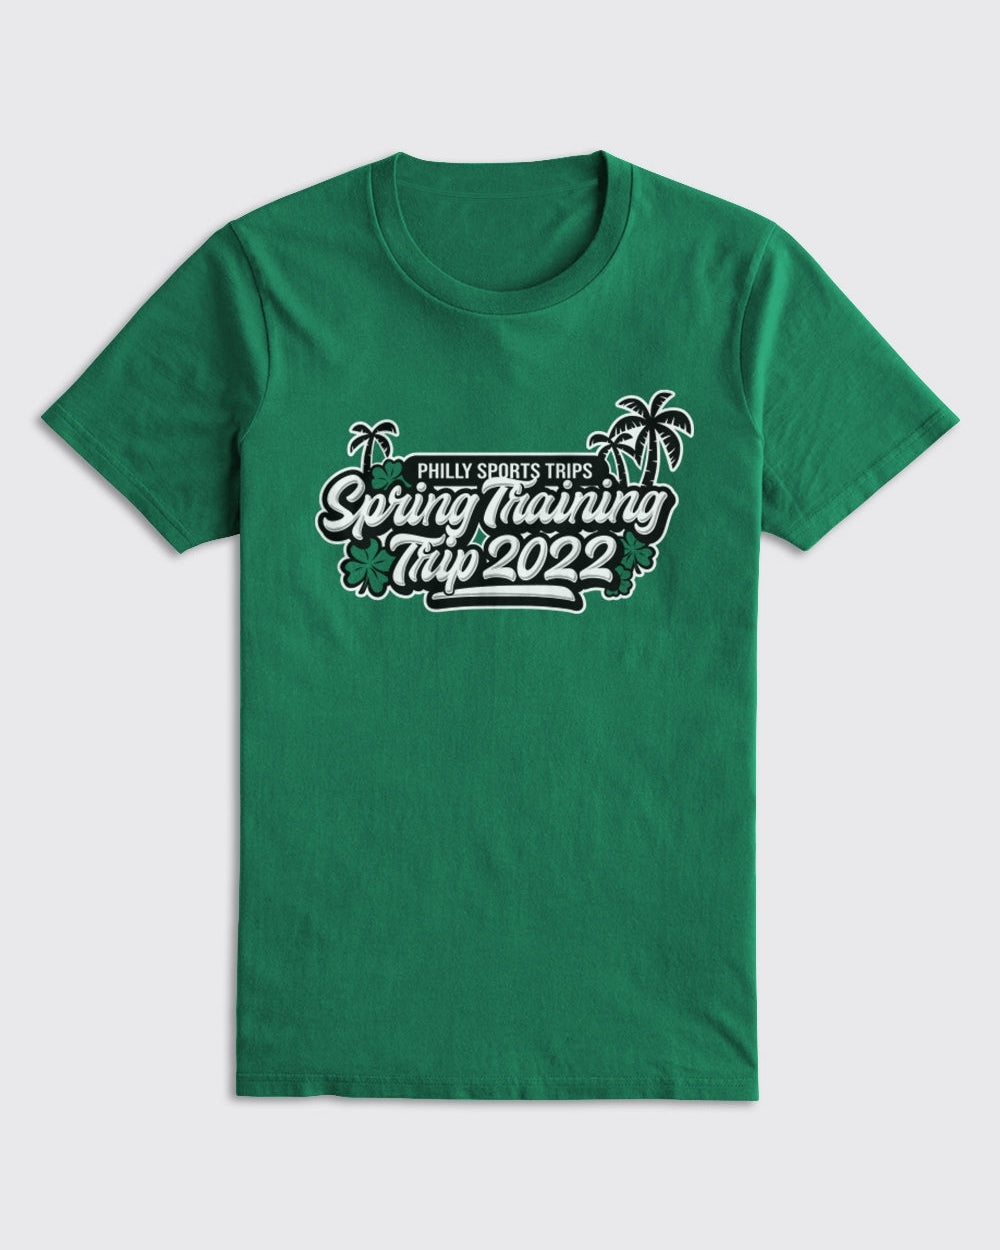 PST Spring Training Trip 2022 Shirt - Philly Sports Trips, T-Shirts - Philly Sports Shirts